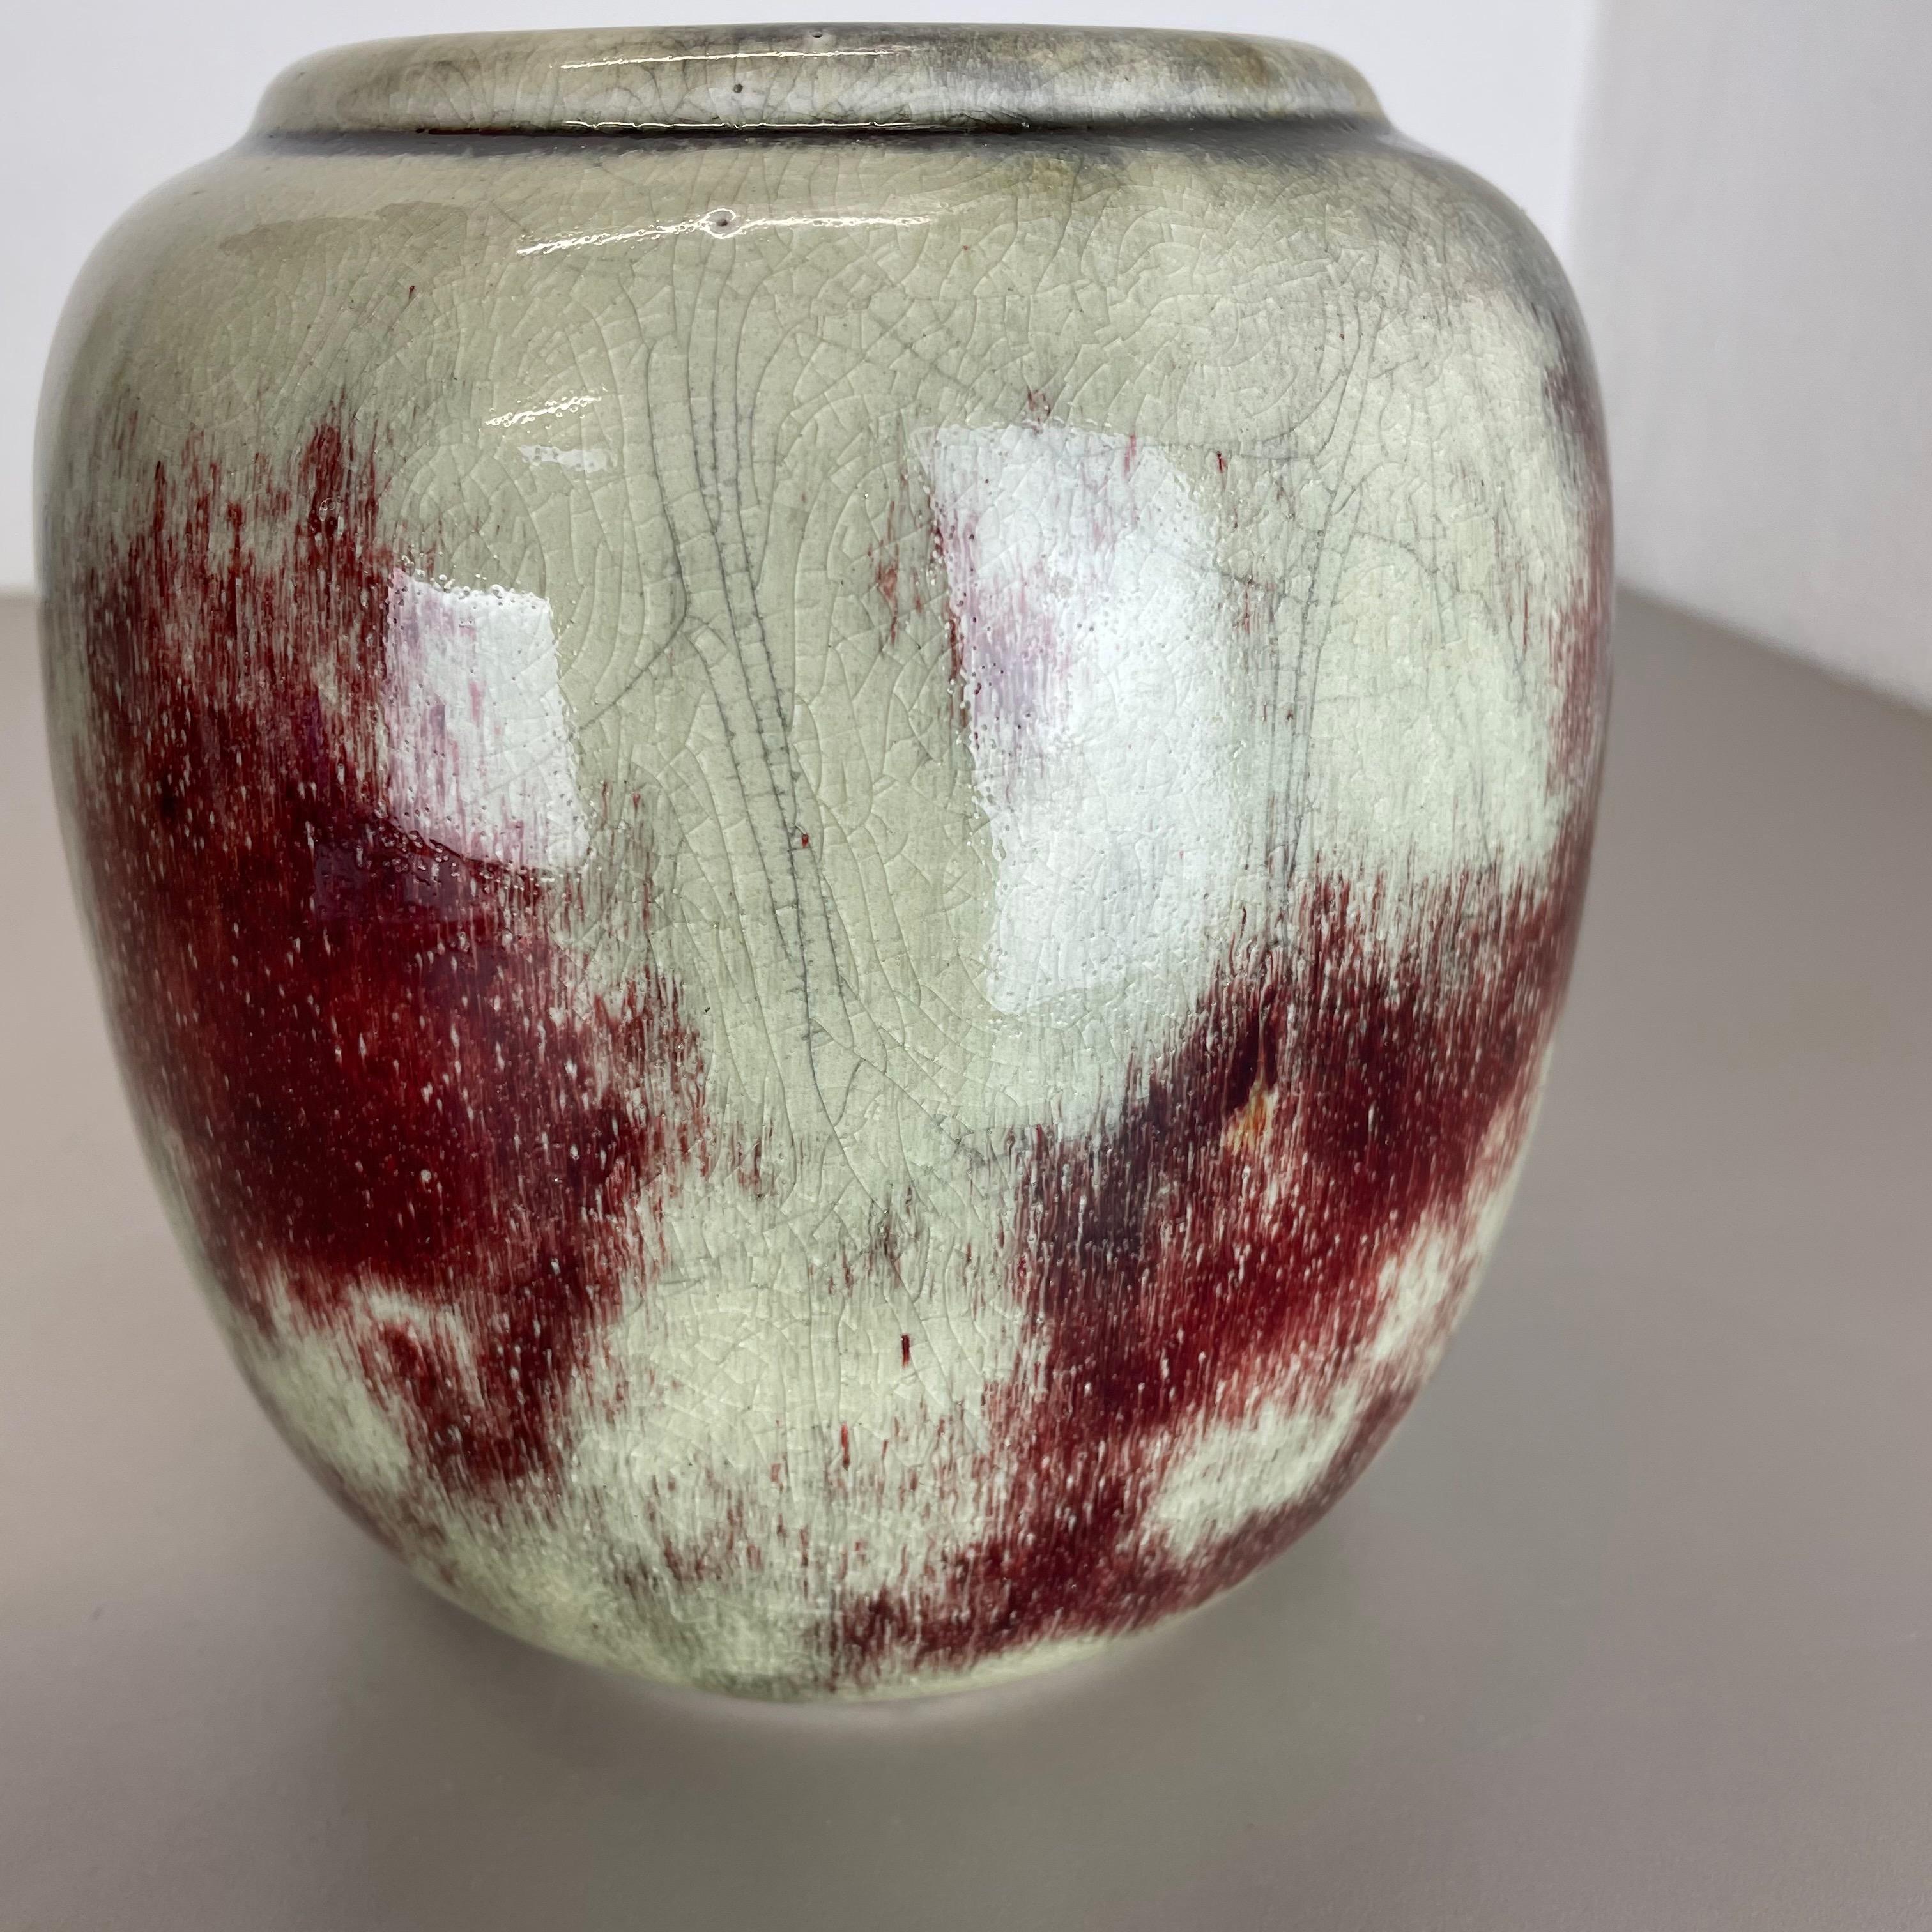 Unique Abstract Bauhaus Vase Pottery by WMF Ikora, Germany 1930s Art Deco For Sale 6